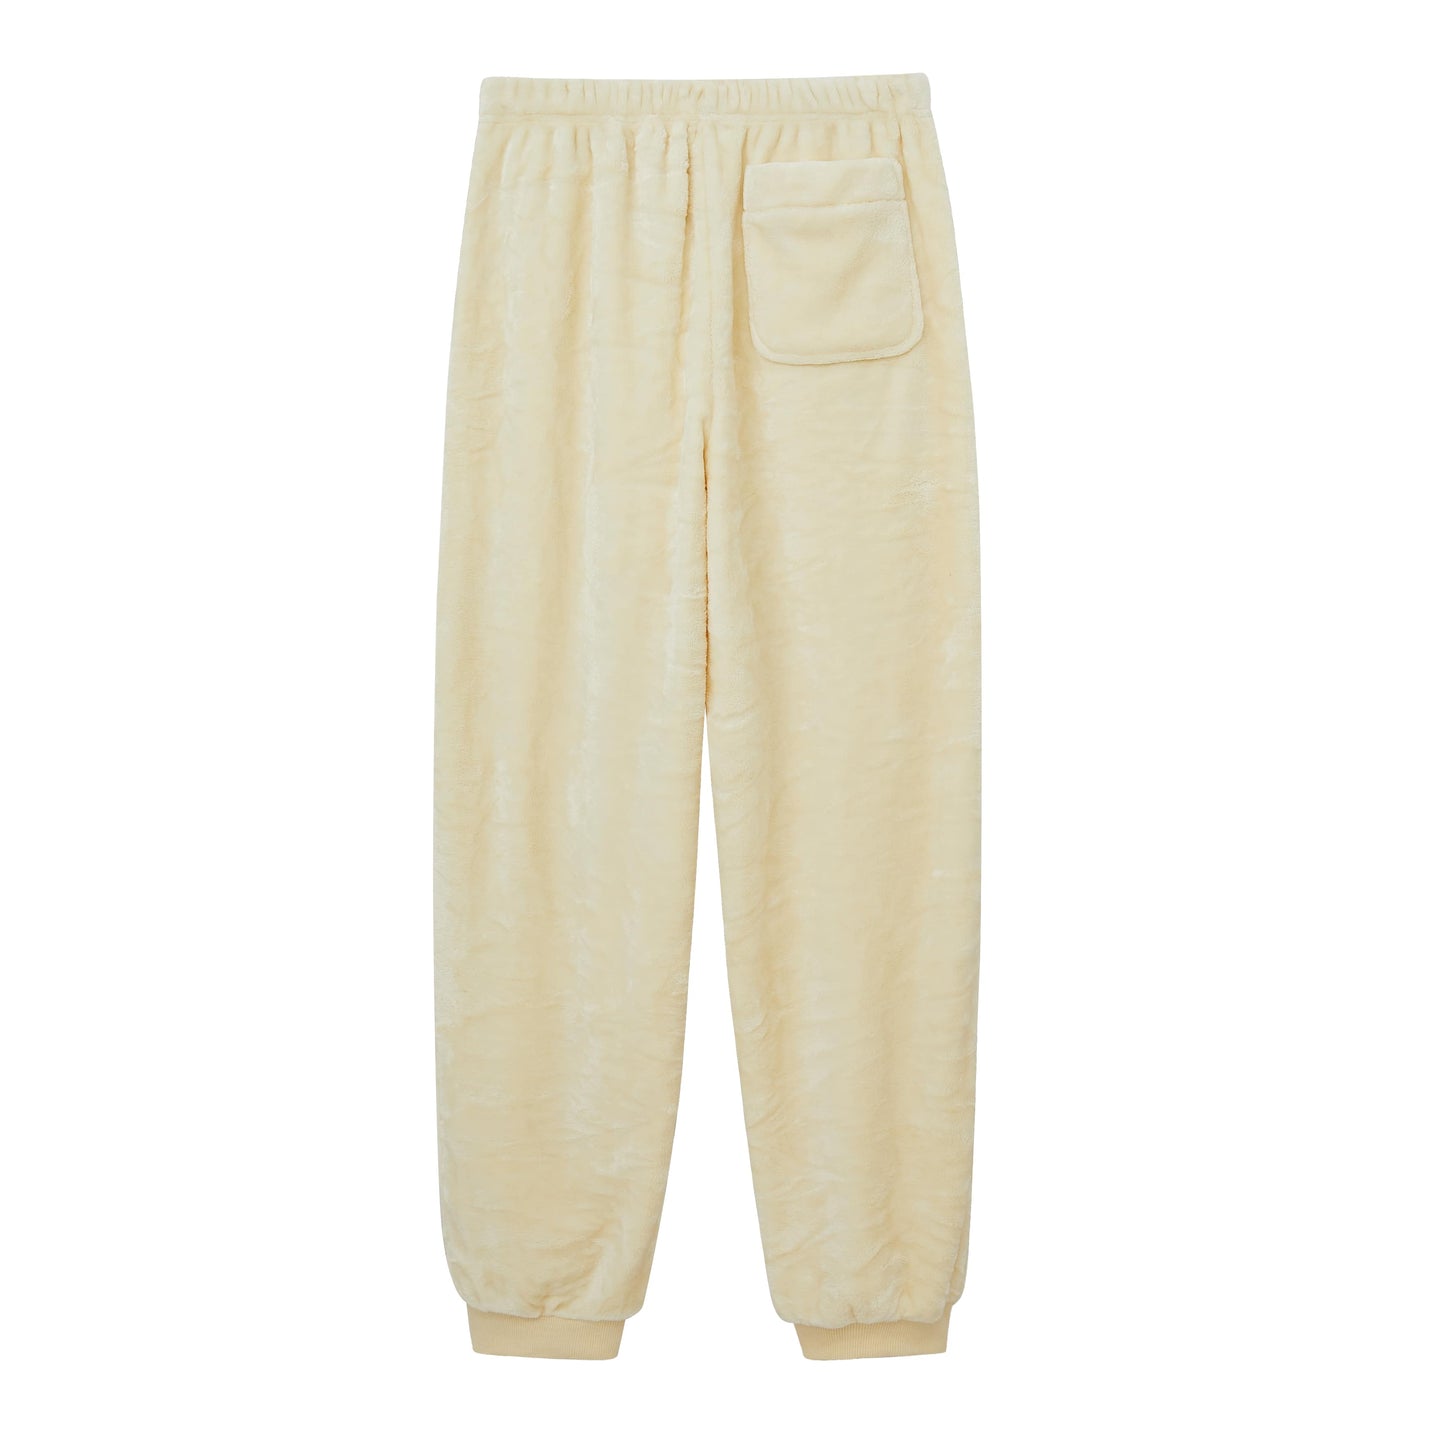 Cream Color Tapered Lounge Pants from Back